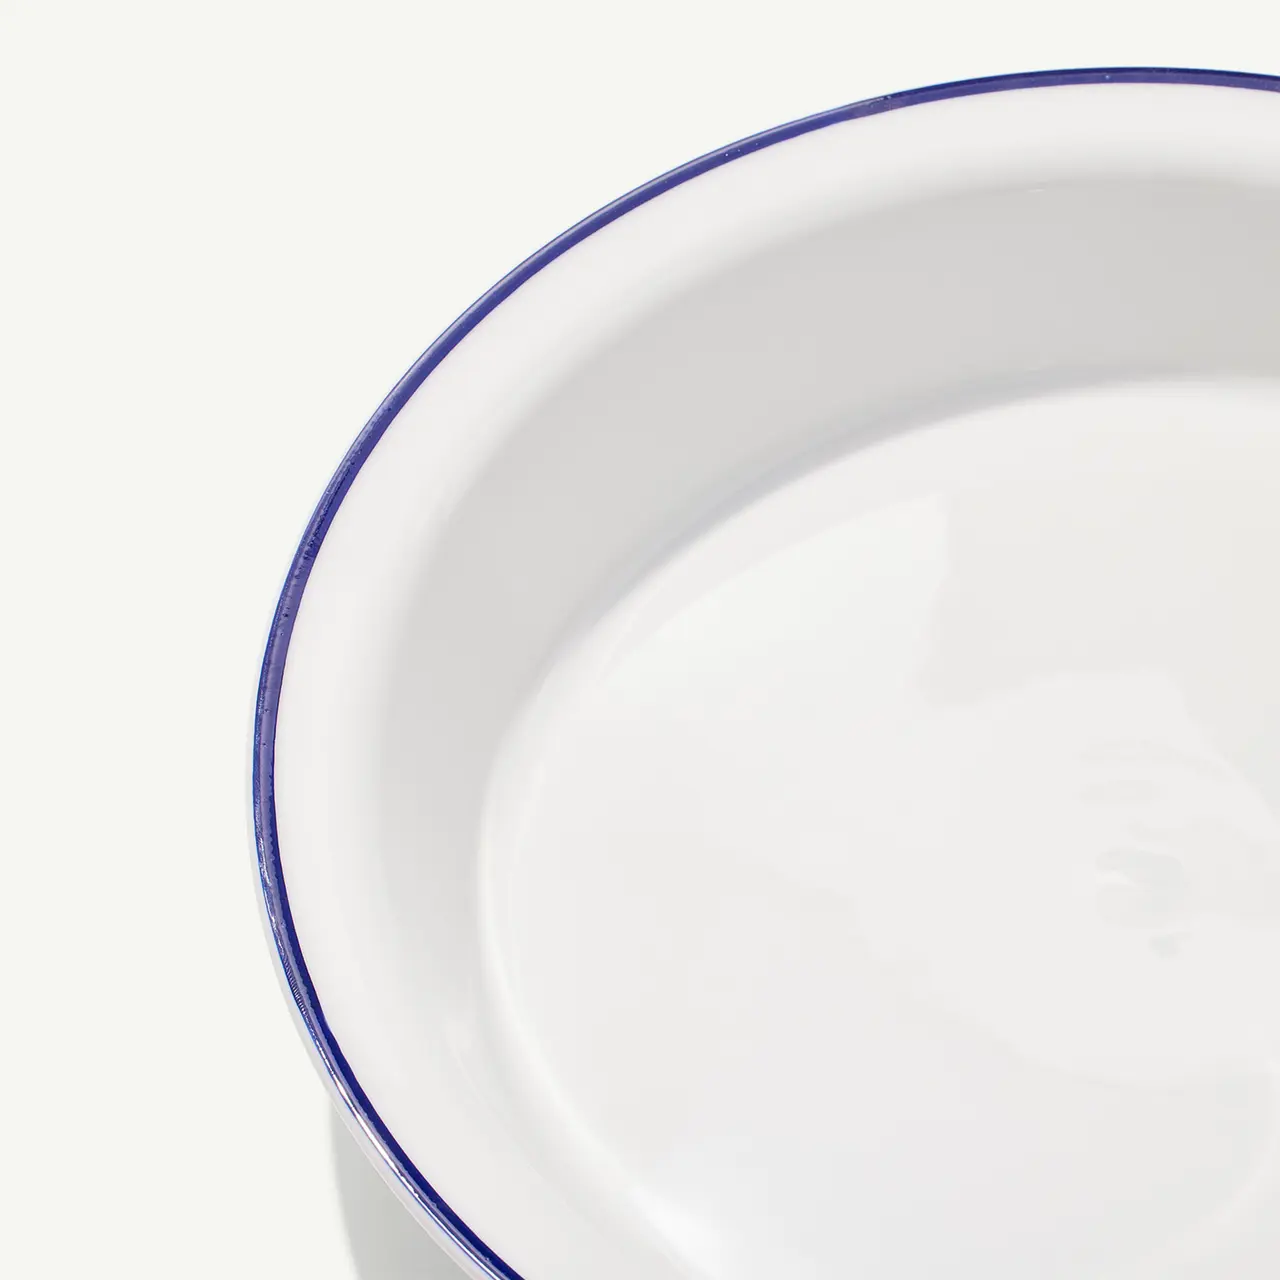 A close-up view of a plain white plate with a blue rim on a white background.